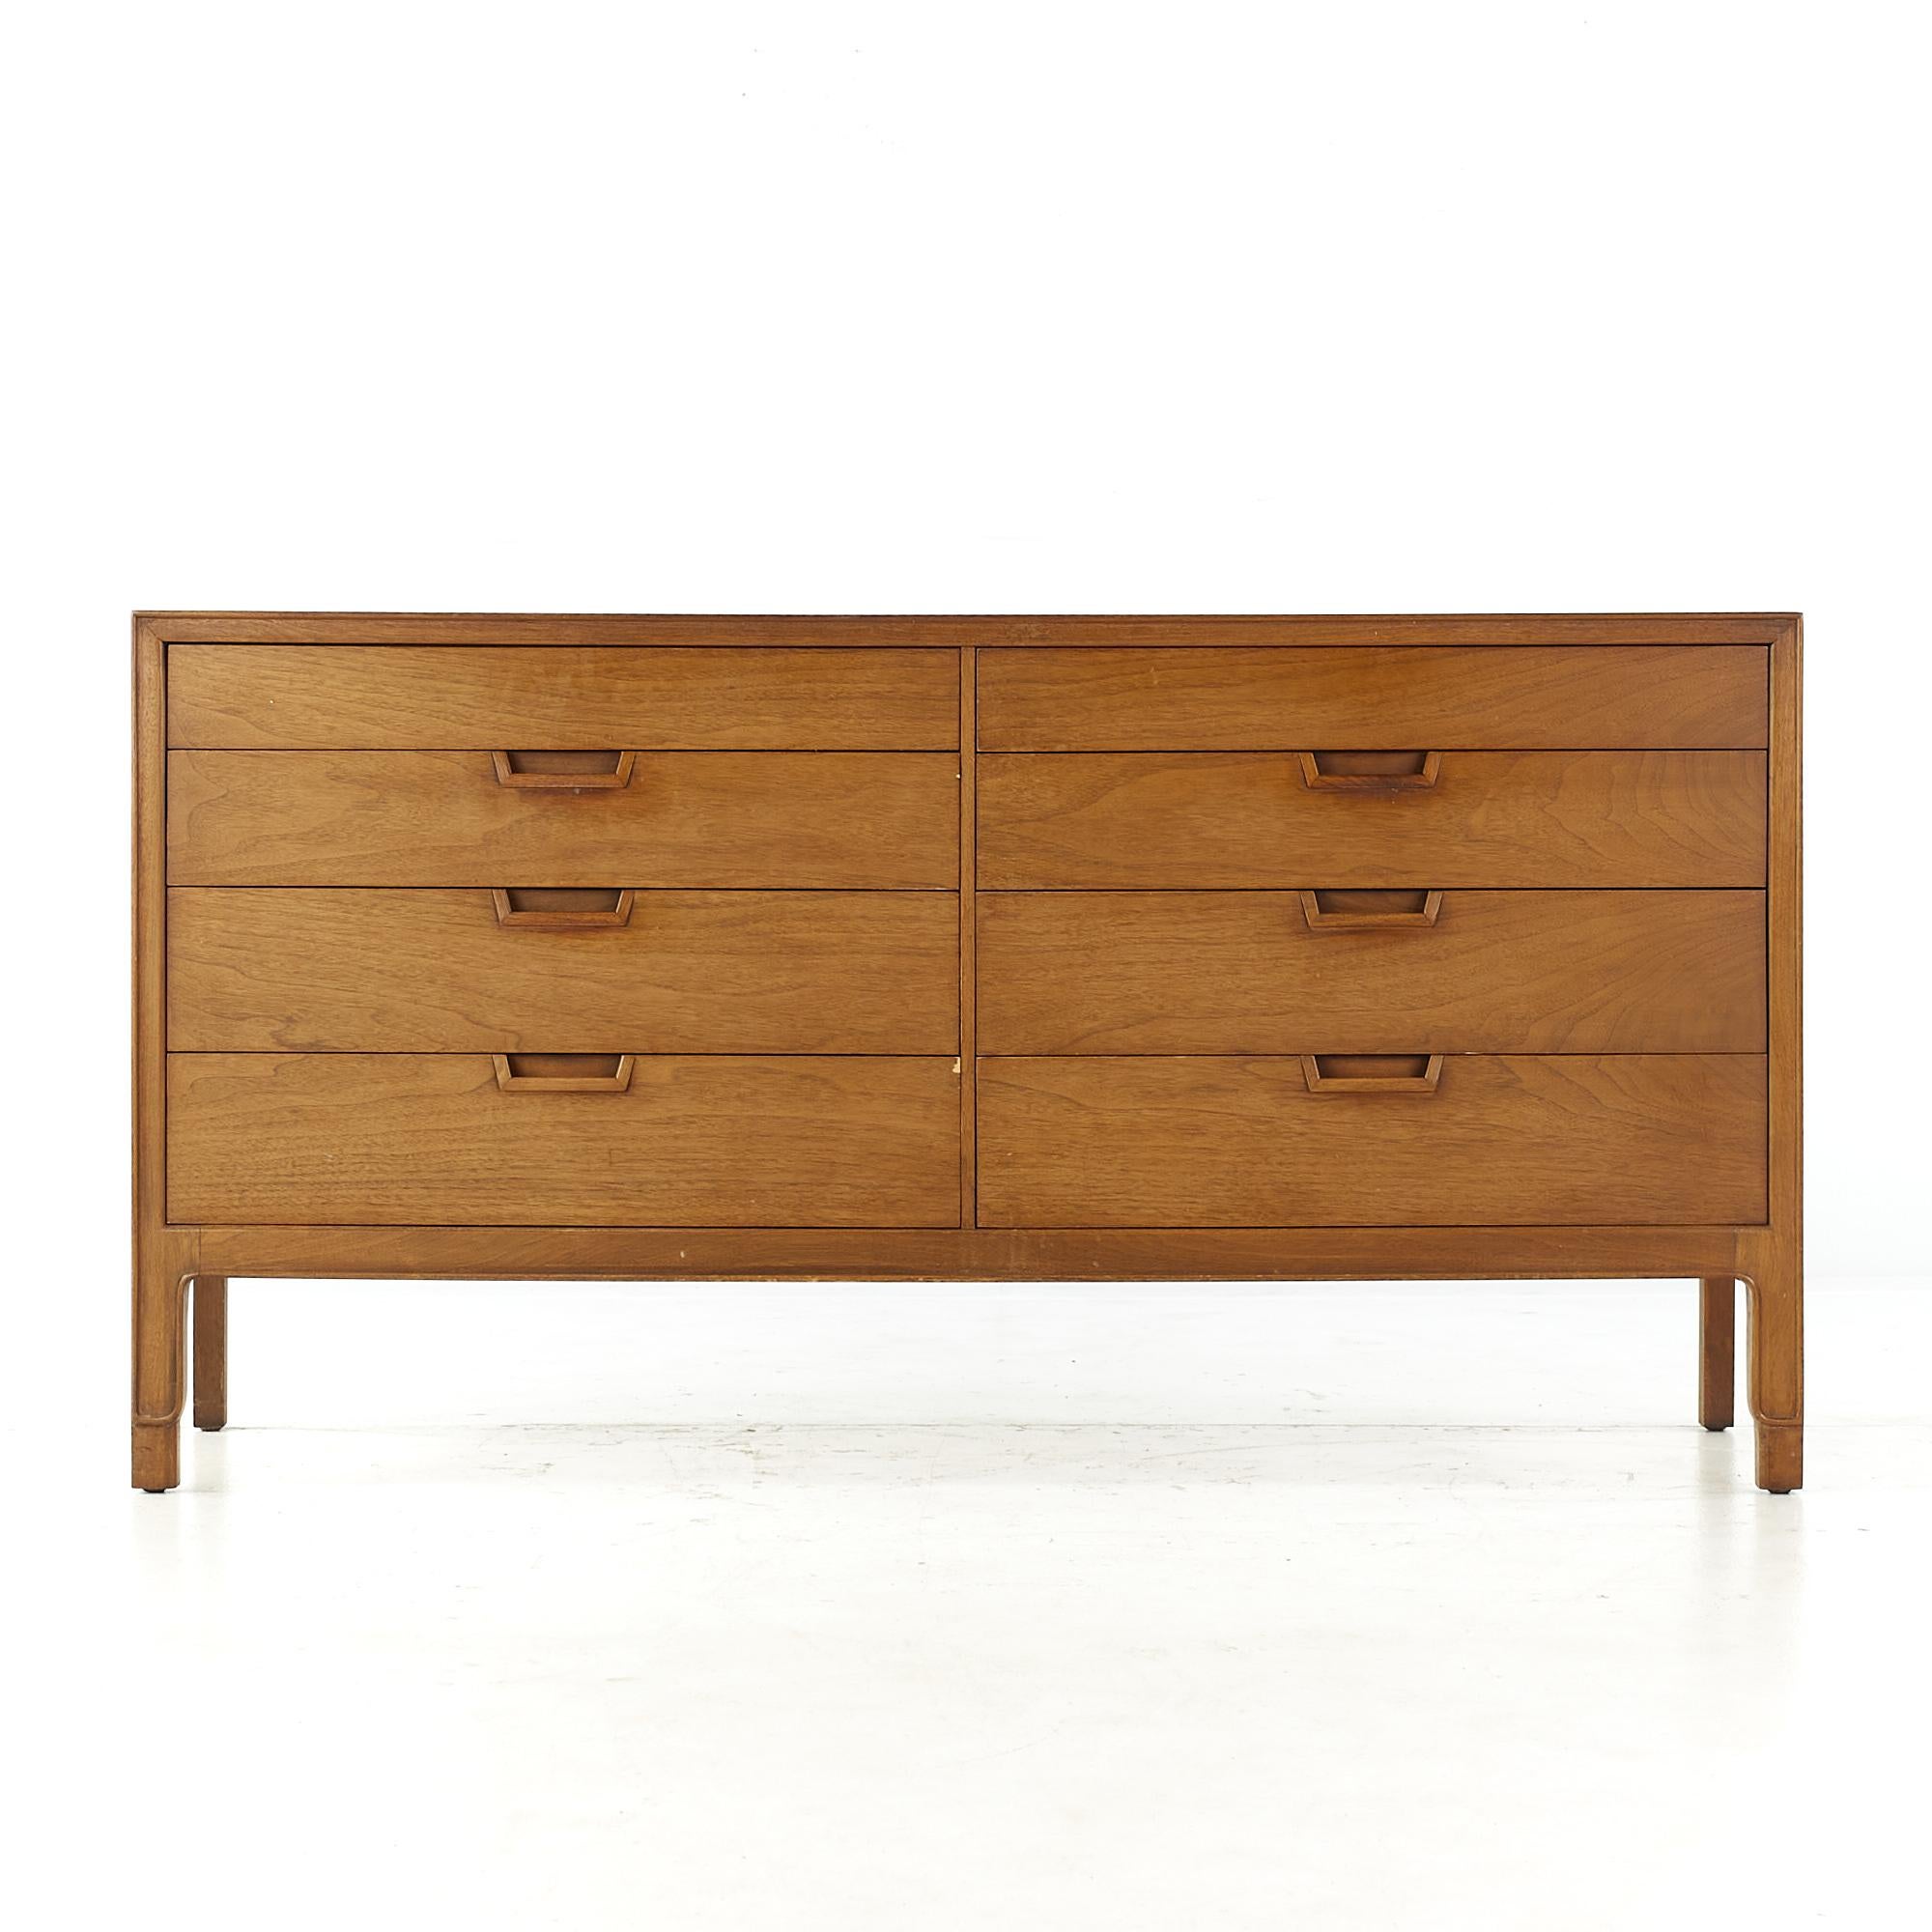 Mount Airy Janus mid century walnut 8 drawer dresser

This dresser measures: 59.75 wide x 19 deep x 31.5 inches high

All pieces of furniture can be had in what we call restored vintage condition. That means the piece is restored upon purchase